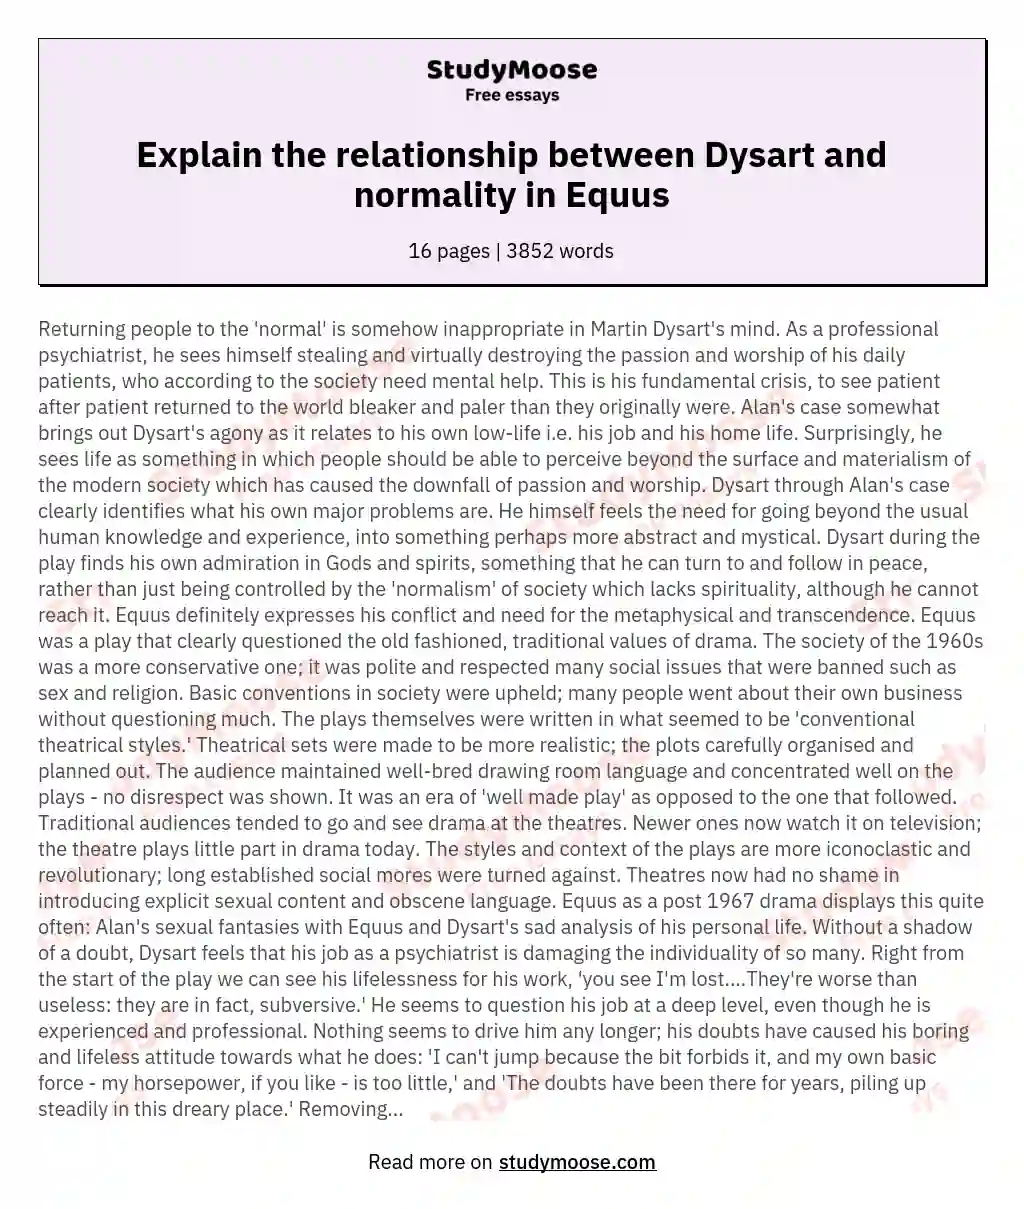 Explain the relationship between Dysart and normality in Equus essay